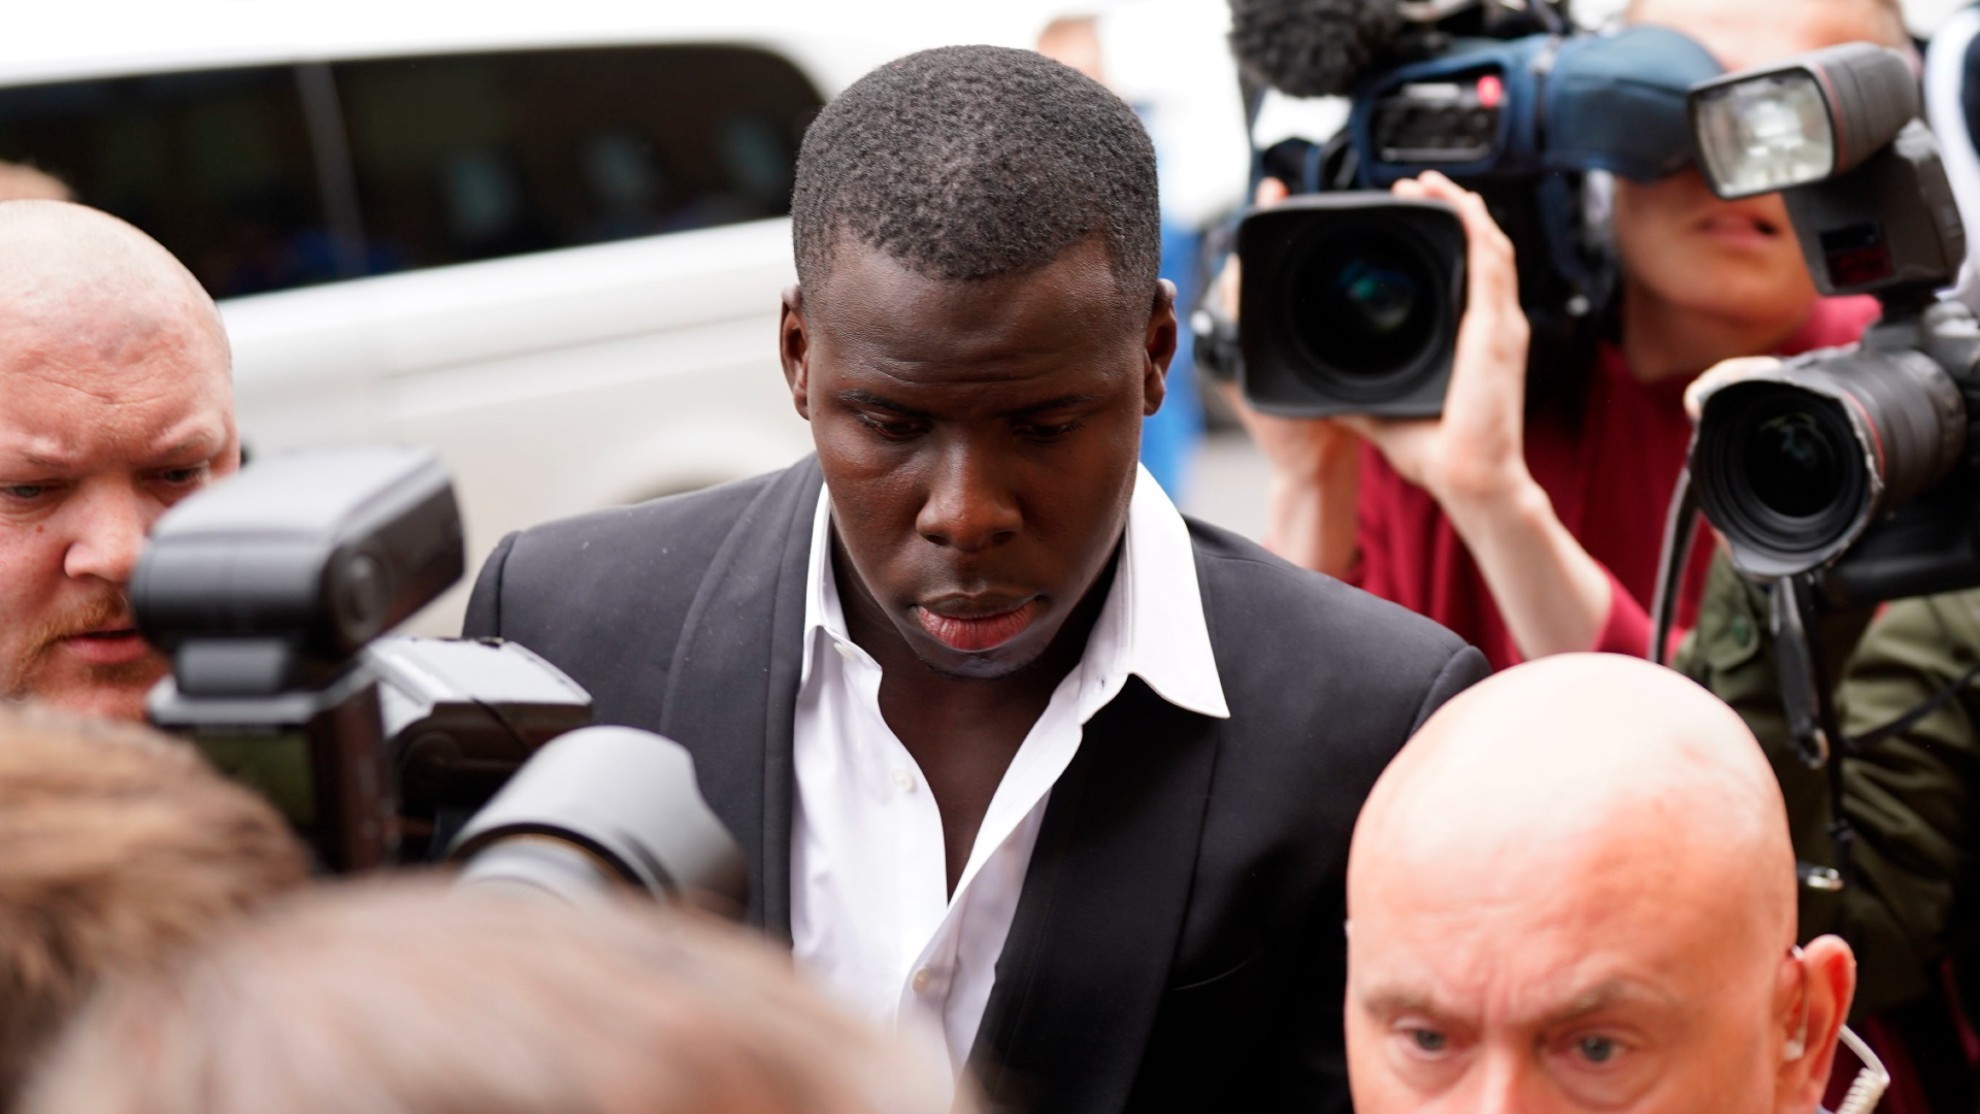 West Ham United player Kurt Zouma arrives at Thames Magistrates Court in London.